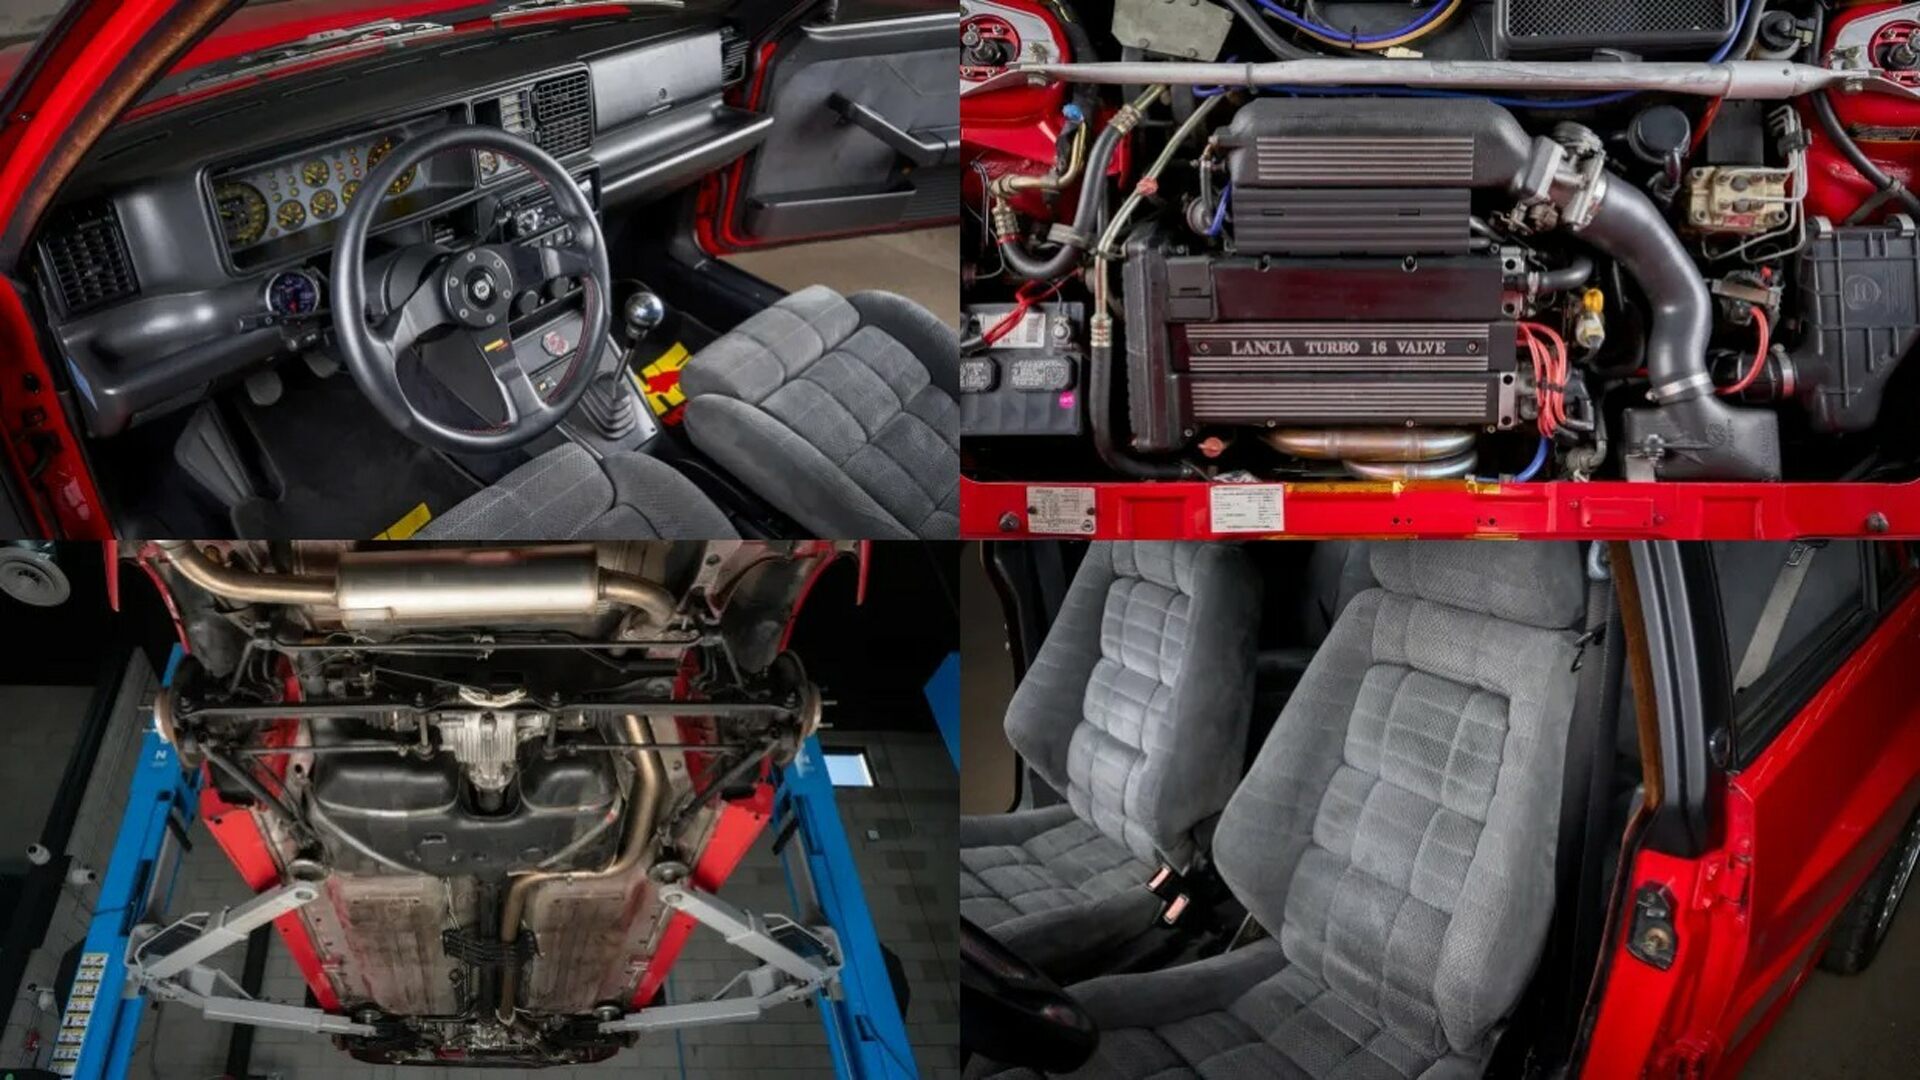 The Interior, Engine Bay, And Undercarriage Of The1992 Lancia Delta Integrale Evo 1 Thats On Auction (Credits Bring A Trailer)